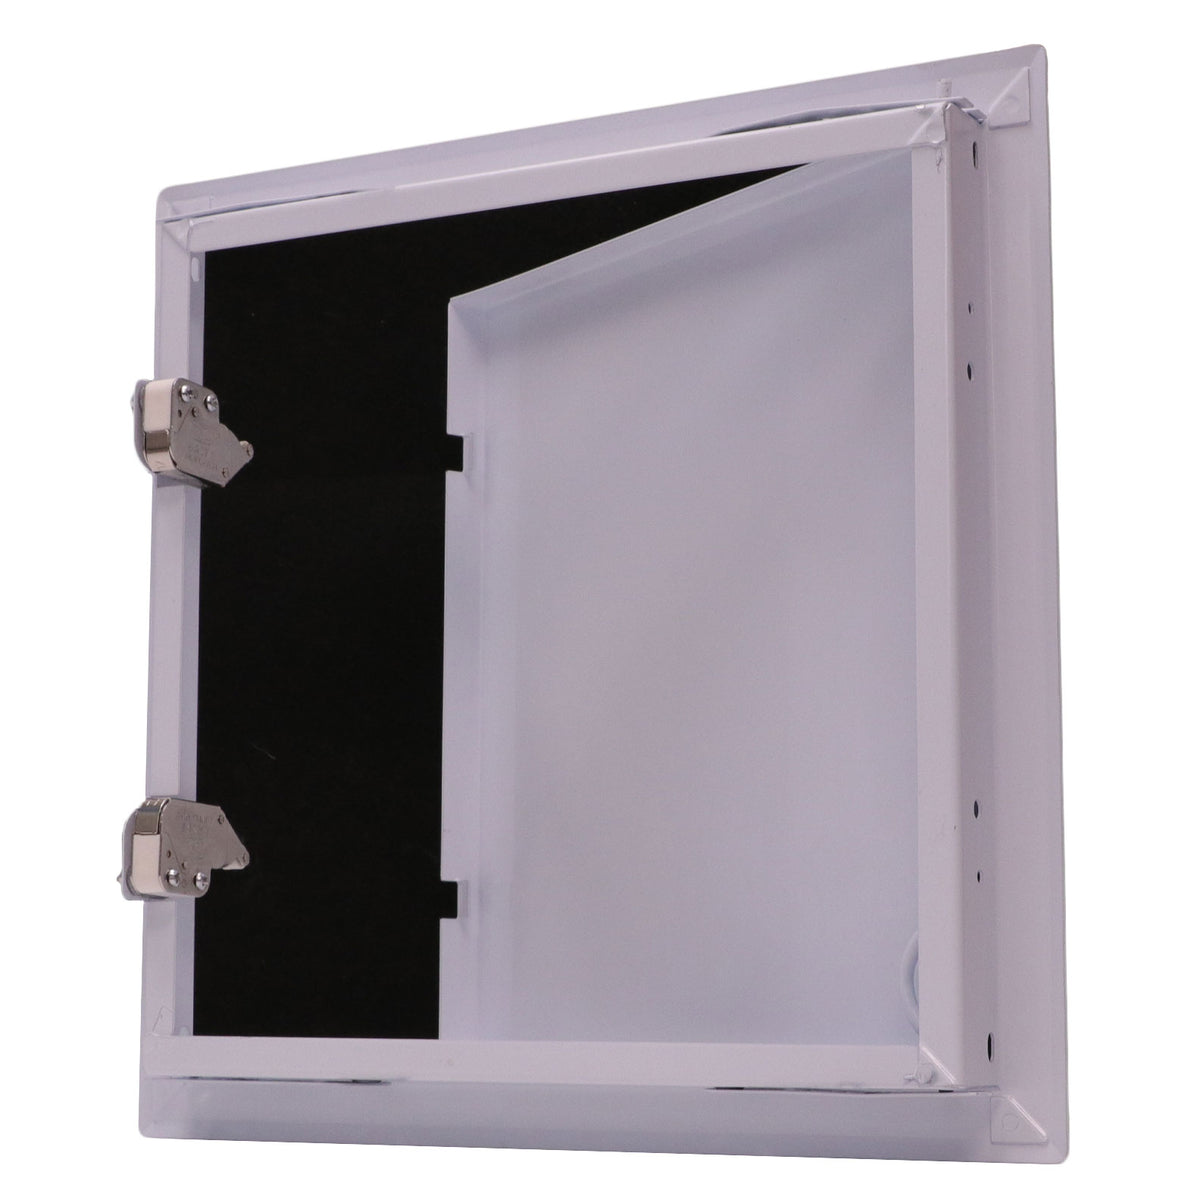 20&quot; X 20&quot;Universal Aluminum Access Panel Door For Wall / Ceiling Application (Push-Lock) With Solid Frame - [Outer Dimensions: 21&quot; Width X 21&quot; Height]